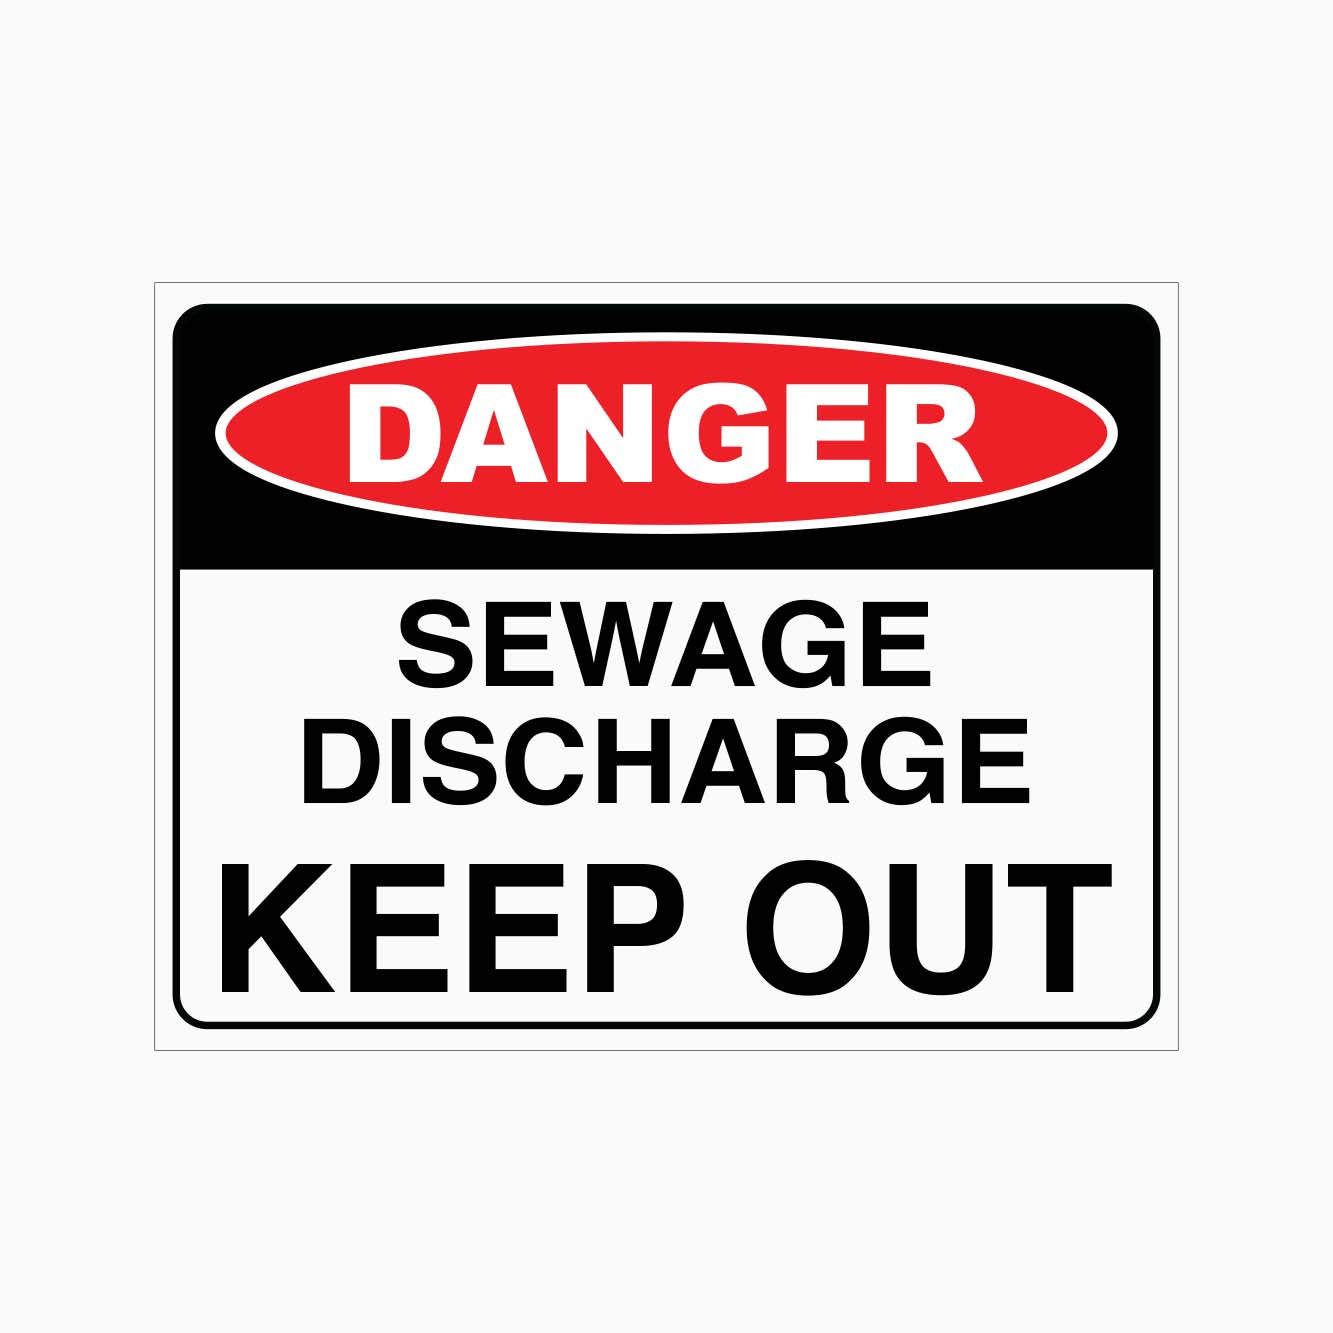 DANGER SEWAGE DISCHARGE KEEP OUT SIGN - GET SIGNS